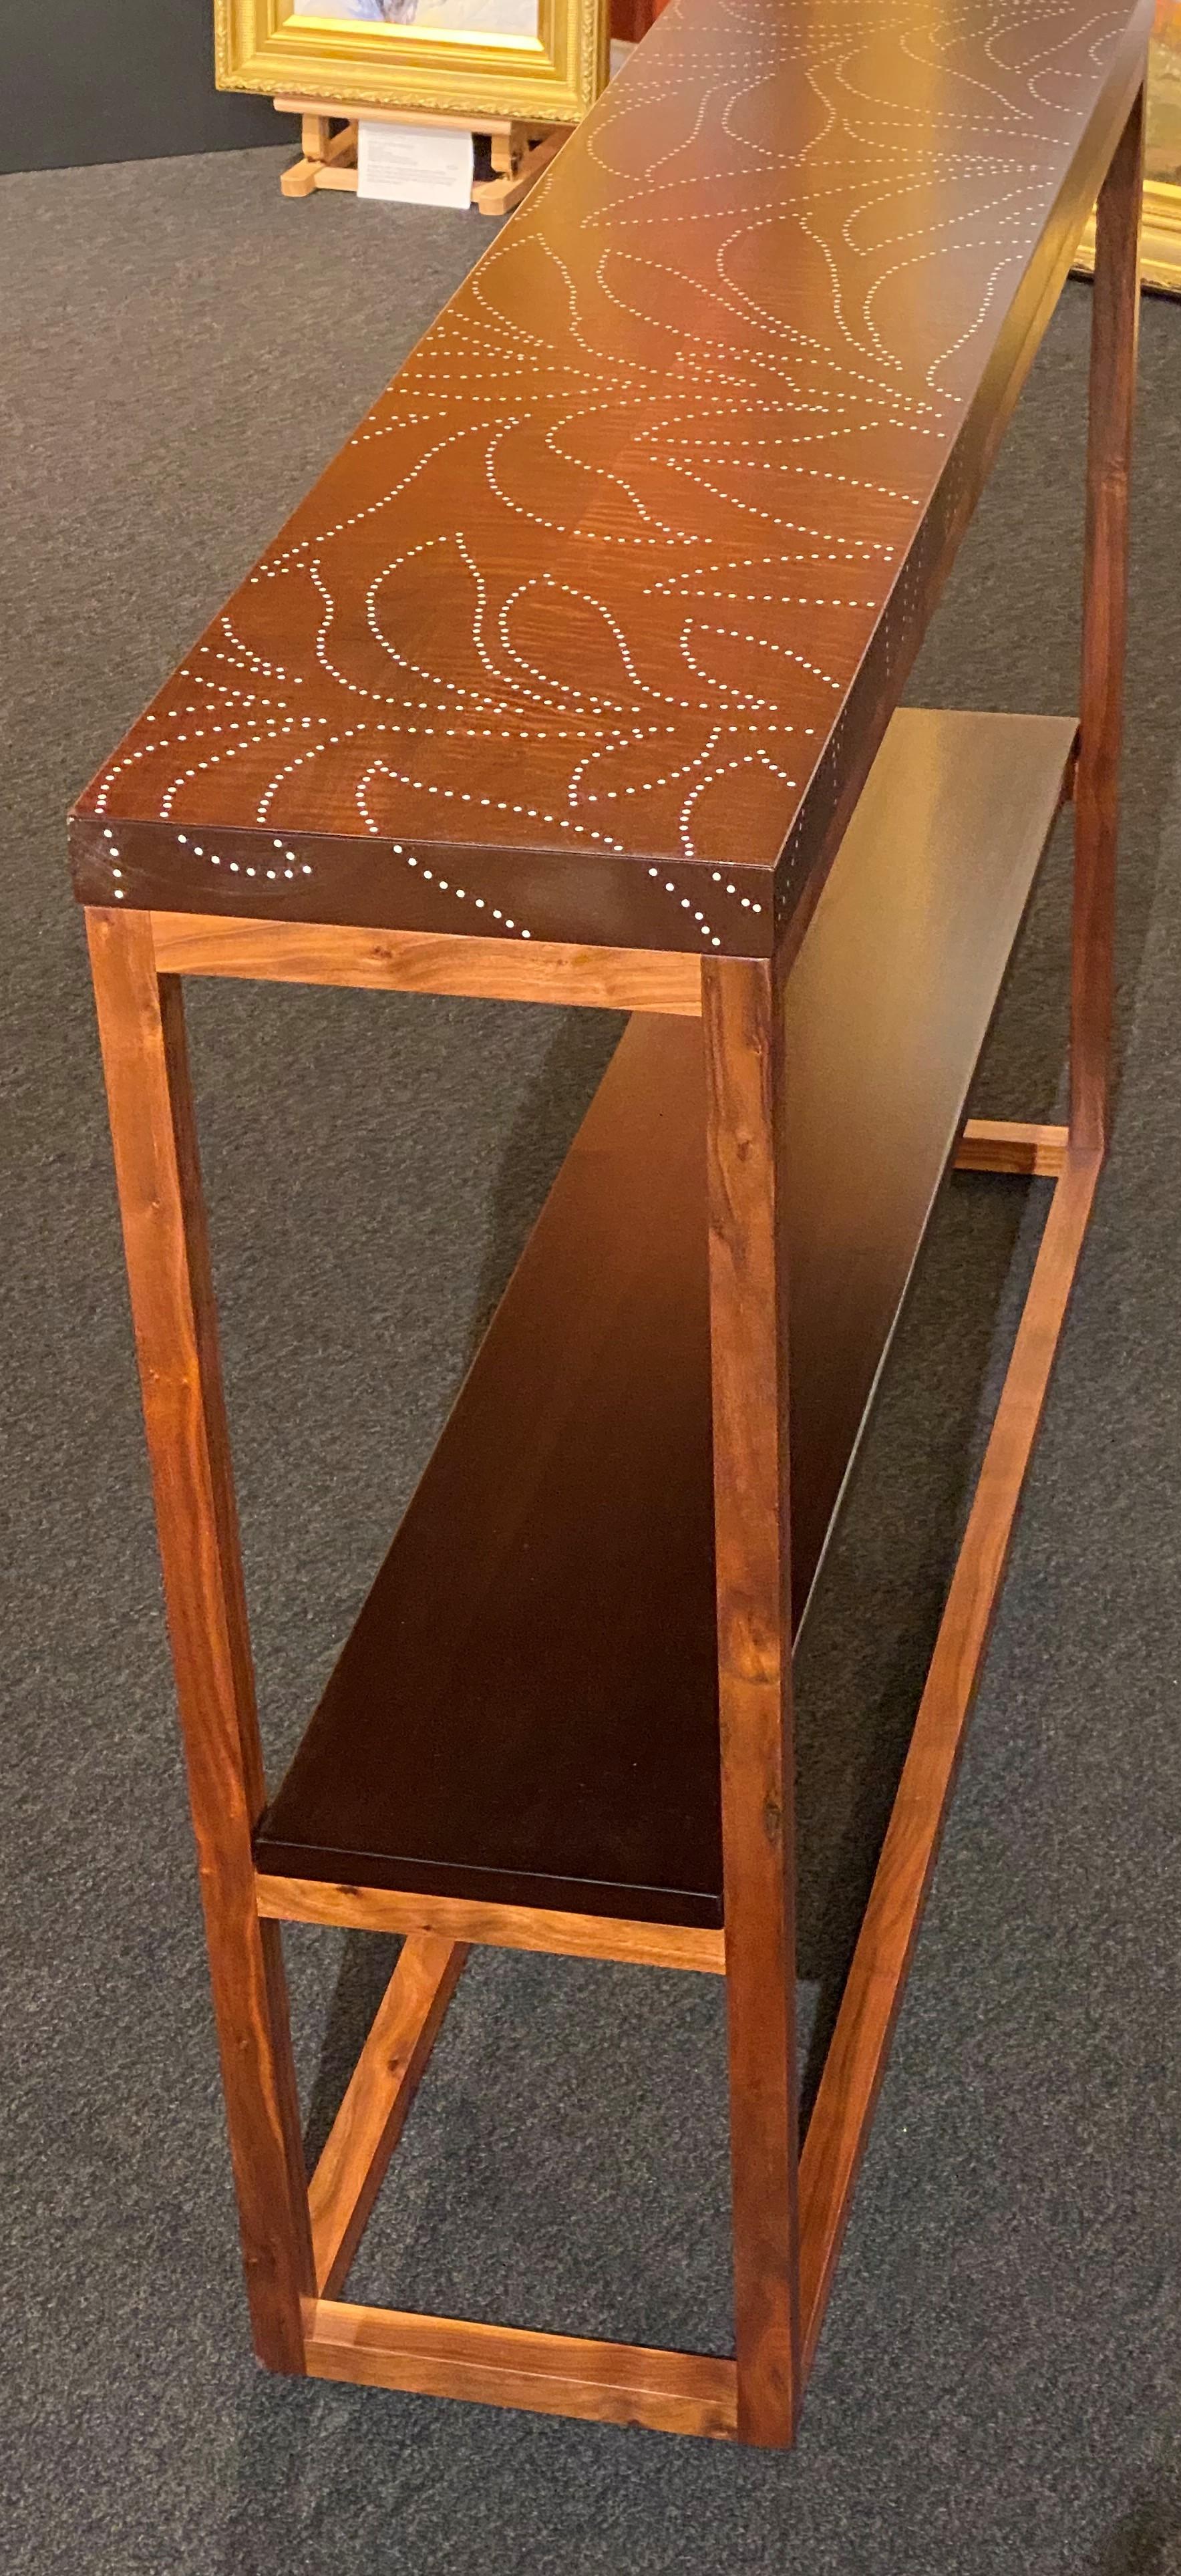 A fine custom contemporary console with medial shelf in walnut and thermally modified maple with a simple inlaid foliate aluminum nail design by artist and furniture maker Peter Sandback. Sandback has gained a national reputation for his intricate